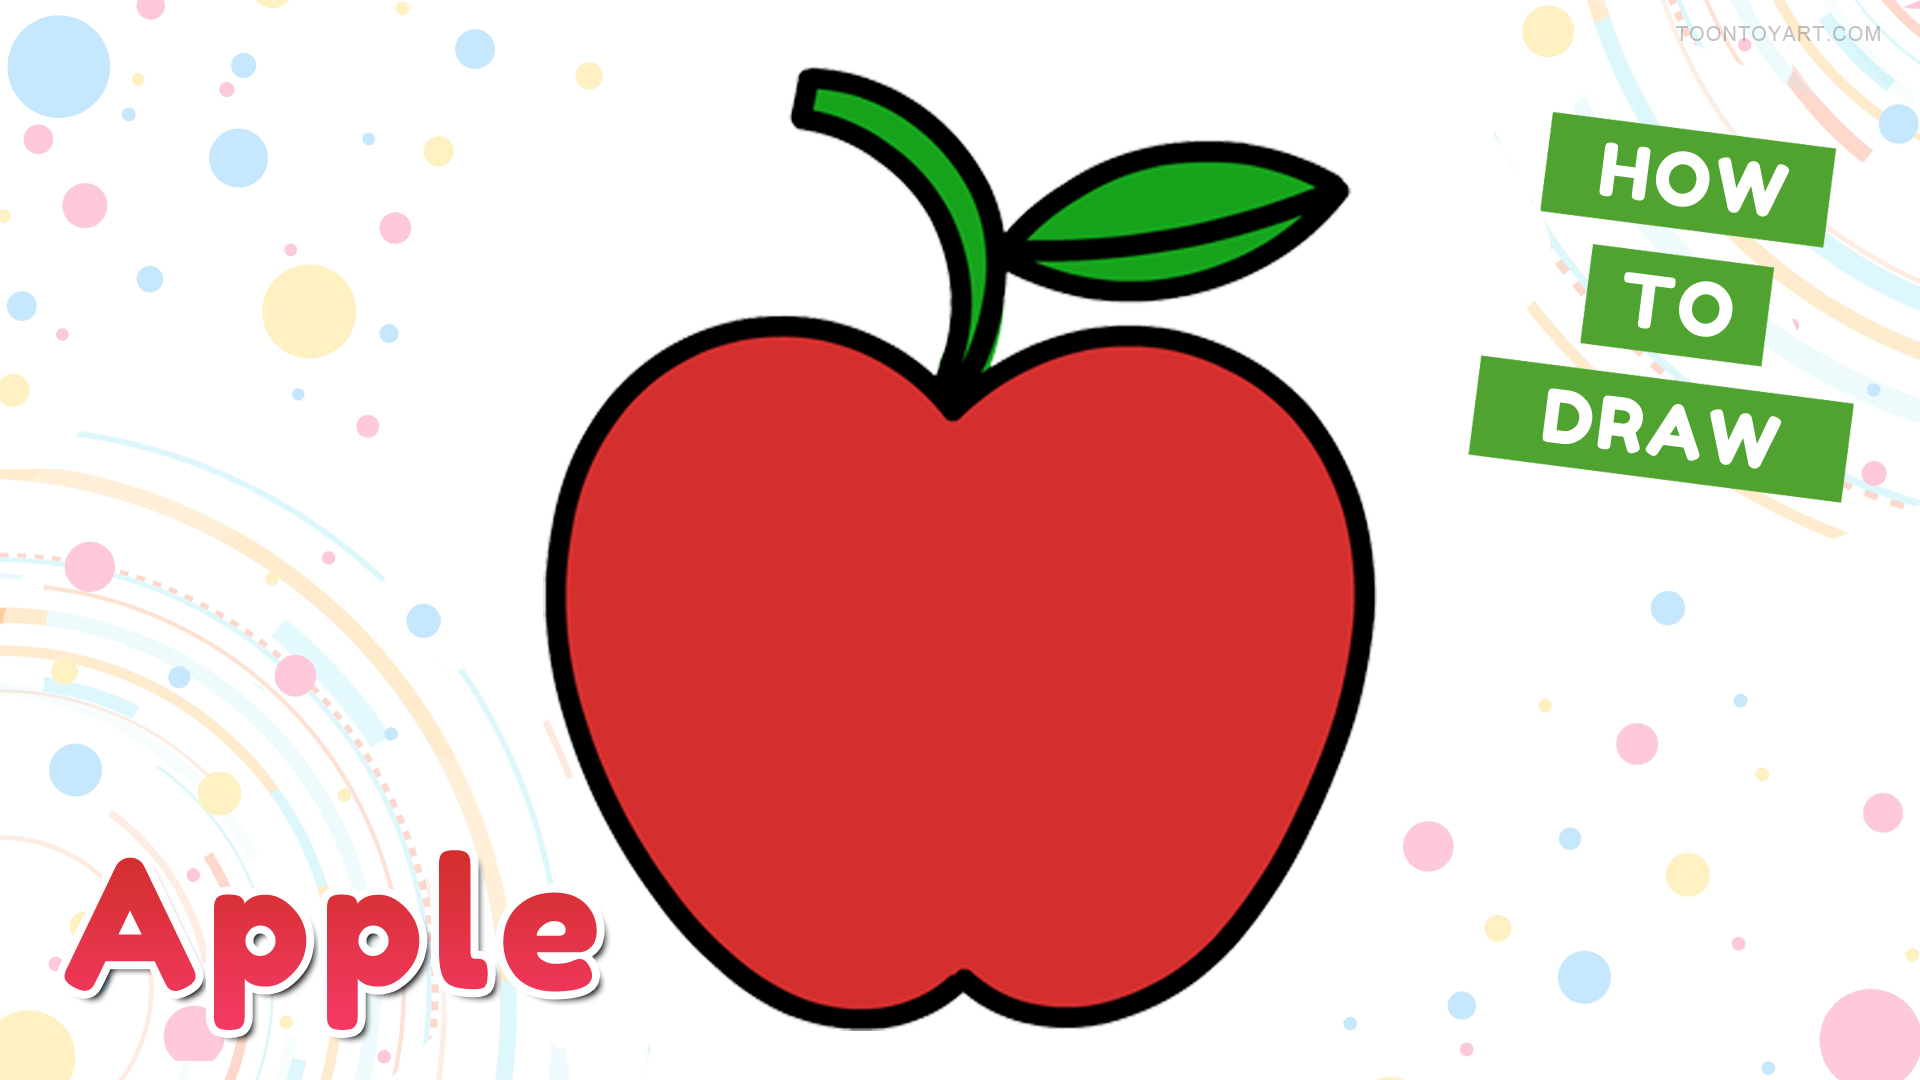 Ripe picturesque green apple - drawing Royalty Free Vector